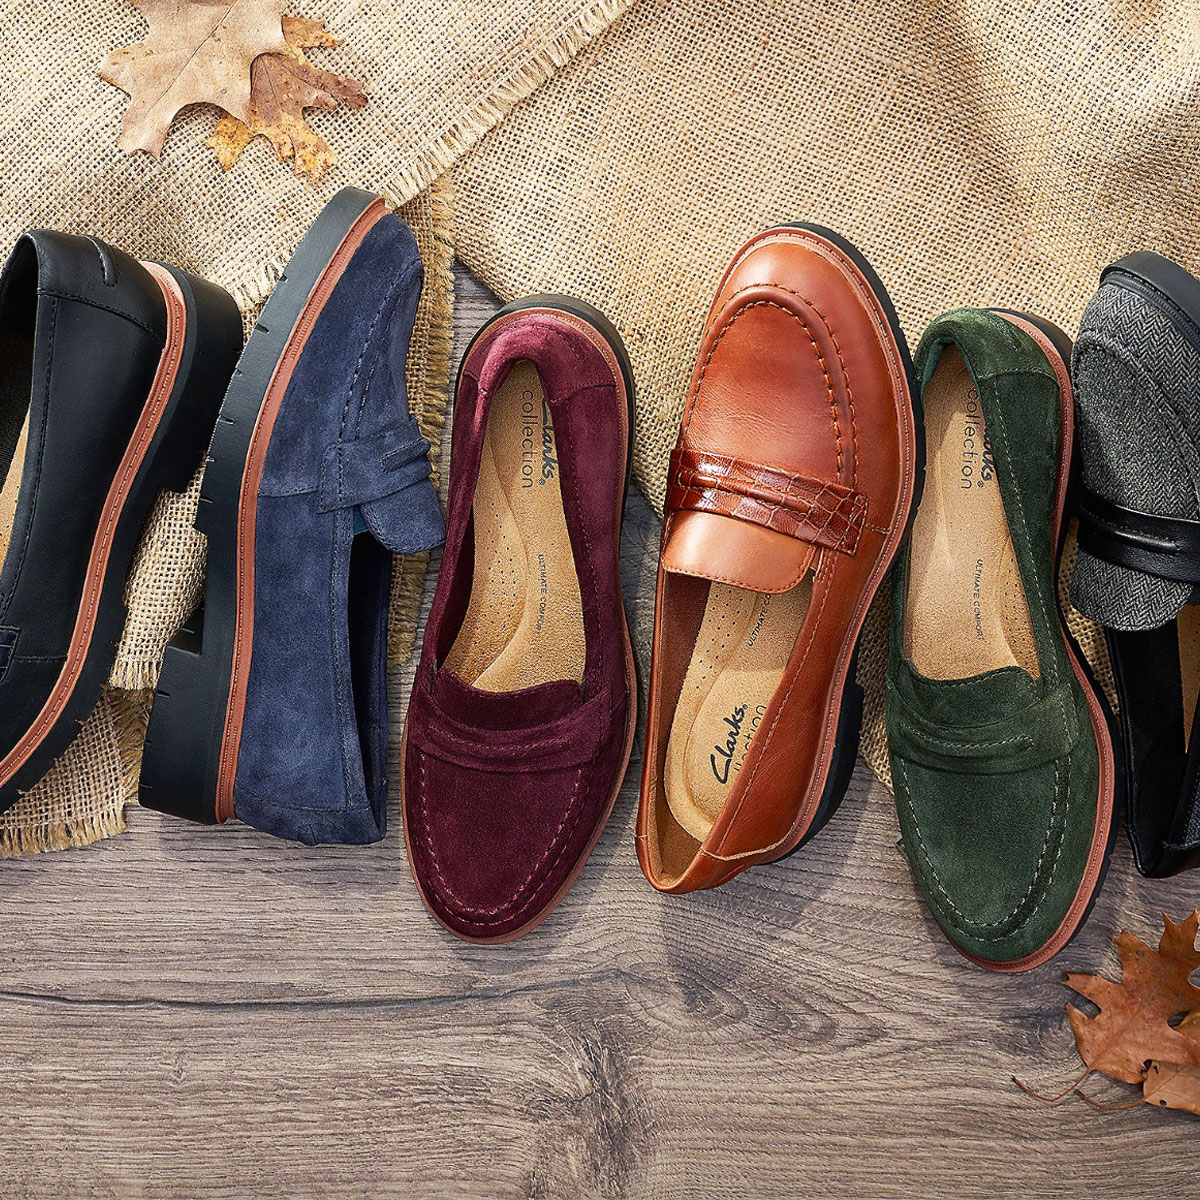 You 24 Hours To Save 25% On These Comfy Clarks Loafers